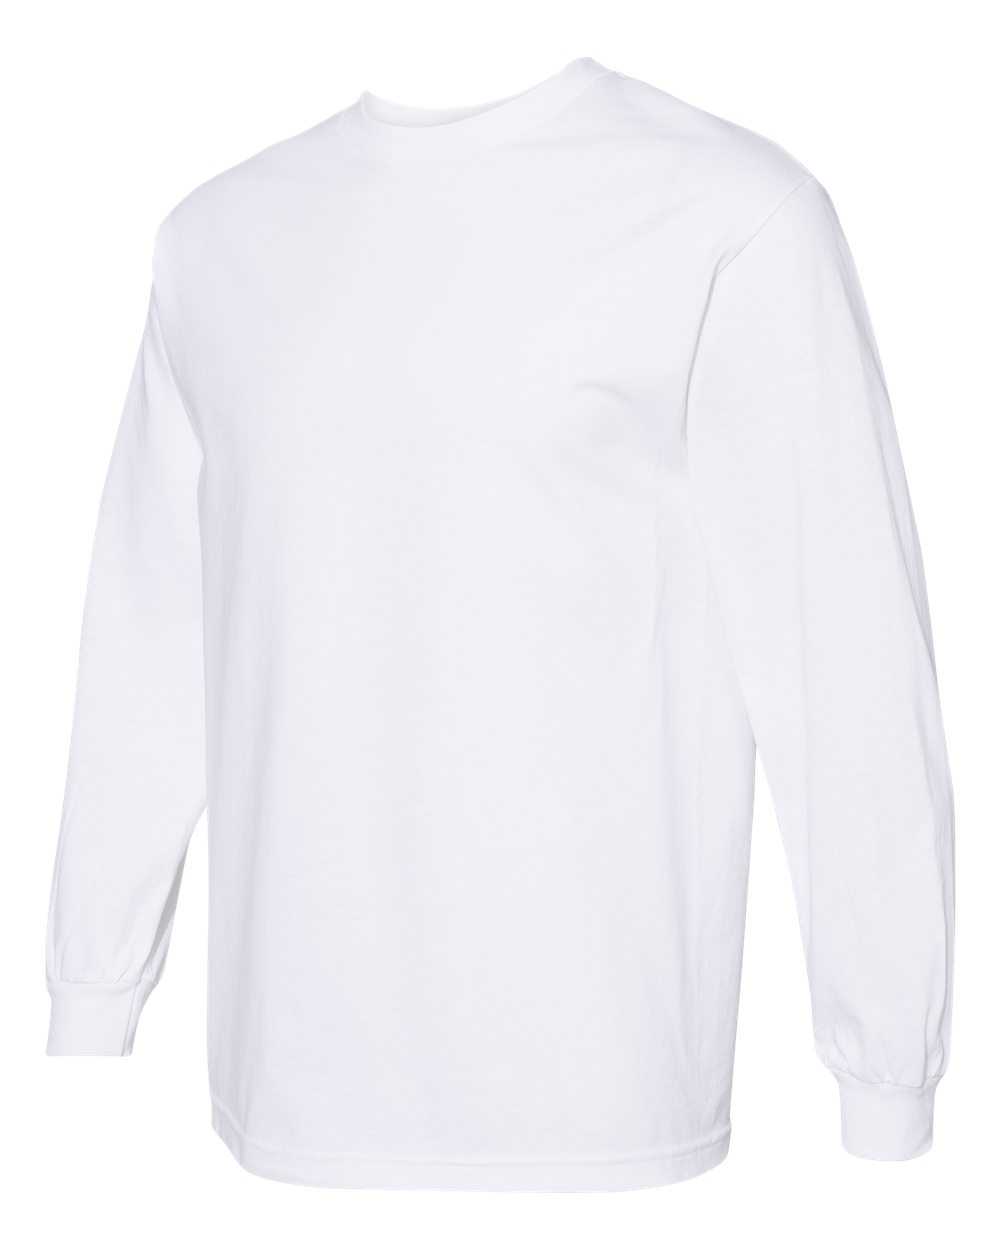 American Apparel 1304 Unisex Heavyweight Cotton Long Sleeve T-Shirt - White - HIT a Double